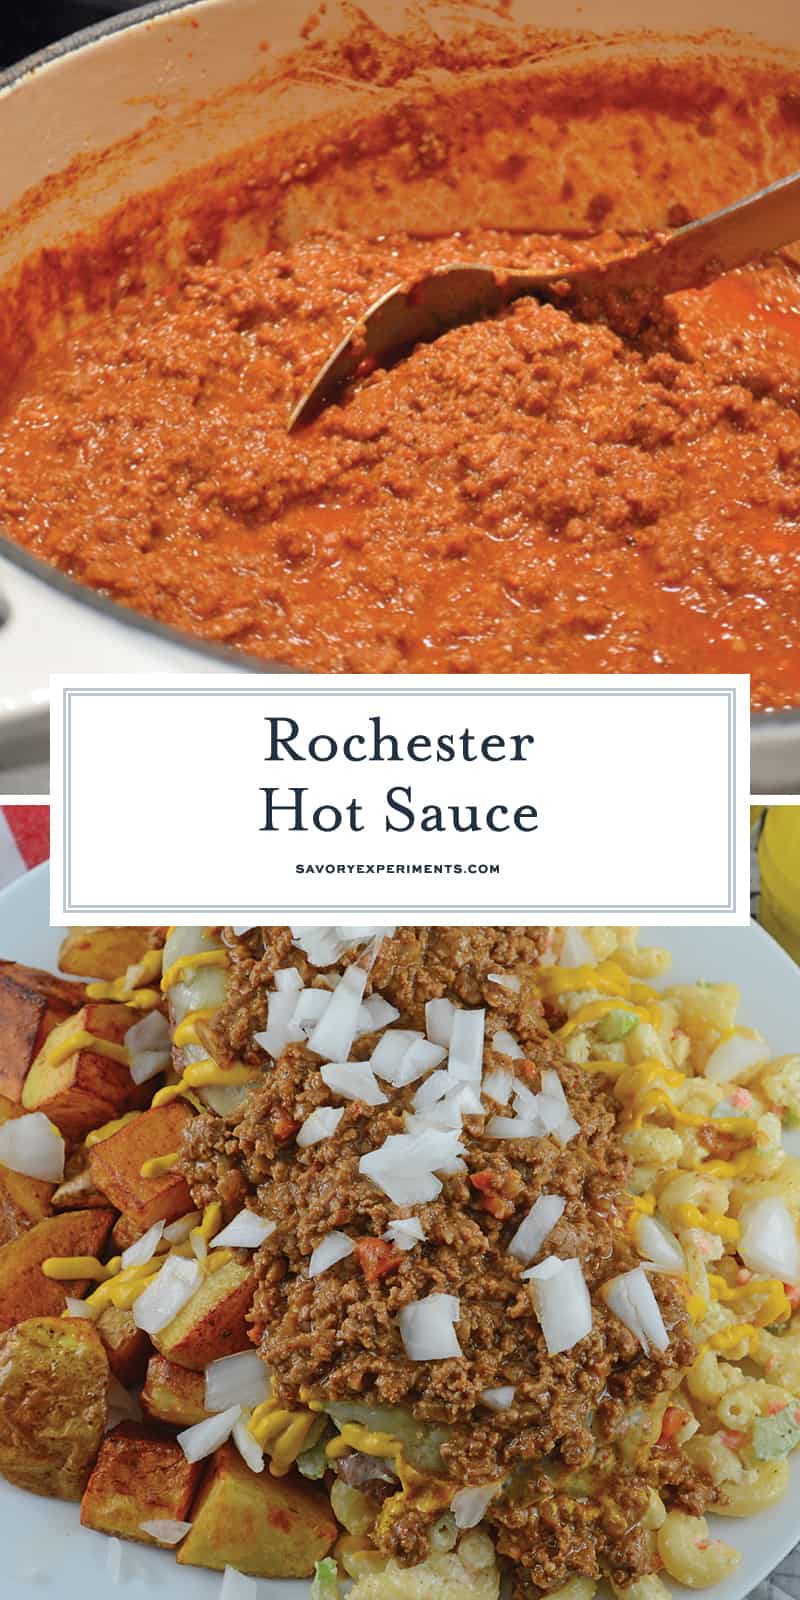 Rochester Hot Sauce is a ground beef and tomato based sauce used to top Garbage Plates. While it is served hot, it is not traditionally spicy. #hotsauce #garbageplates www.savoryexperiments.com